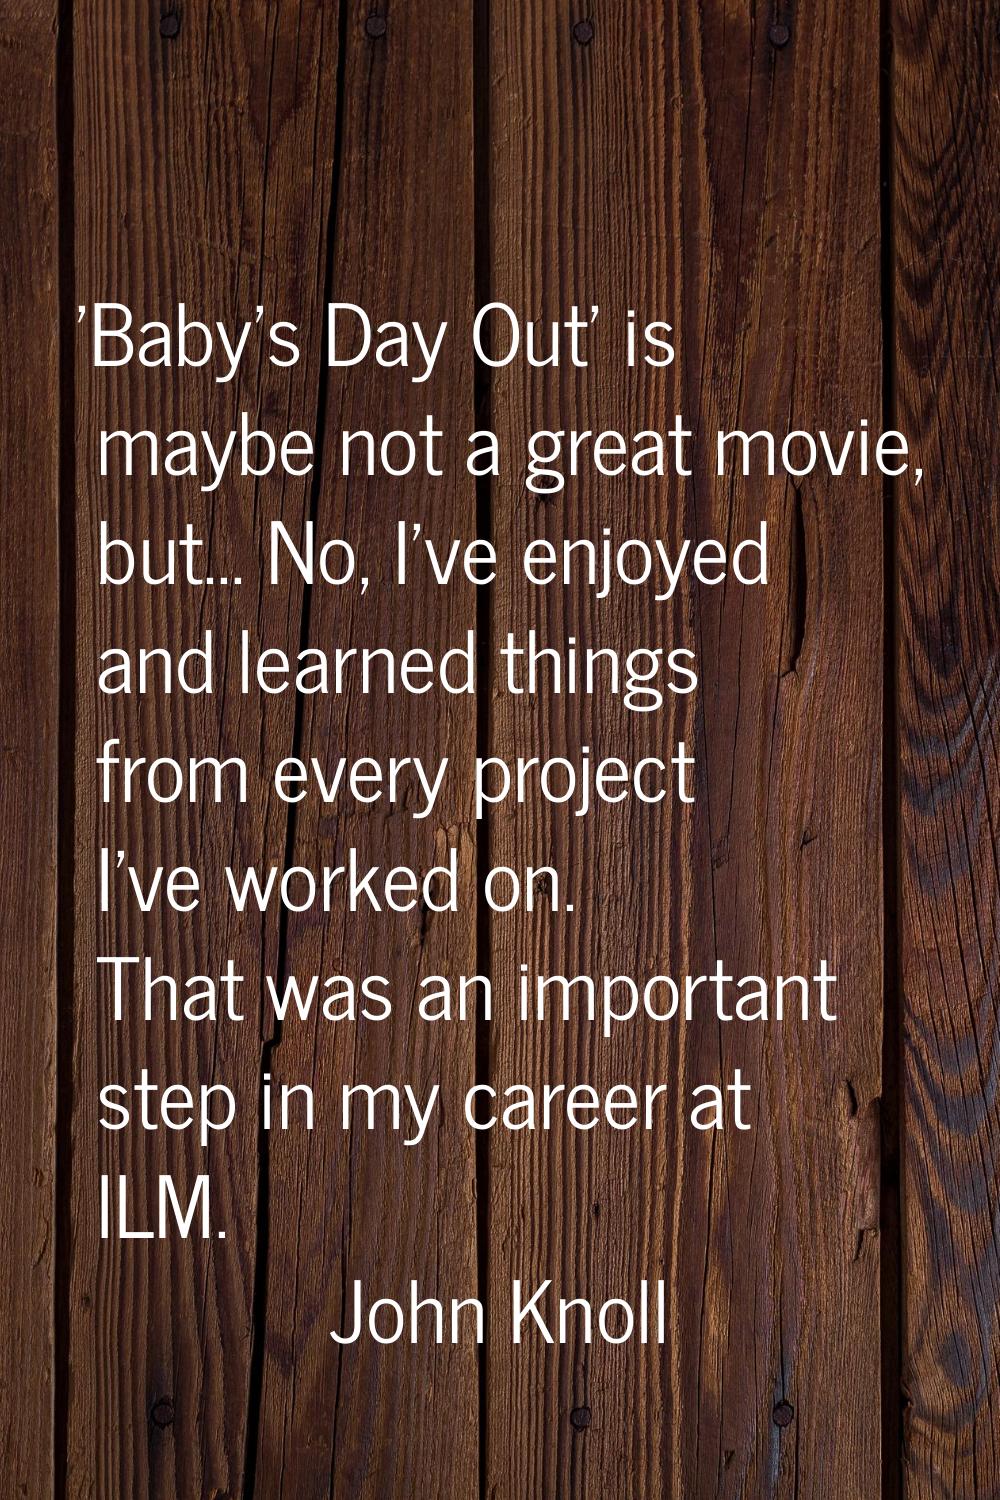 'Baby's Day Out' is maybe not a great movie, but... No, I've enjoyed and learned things from every 